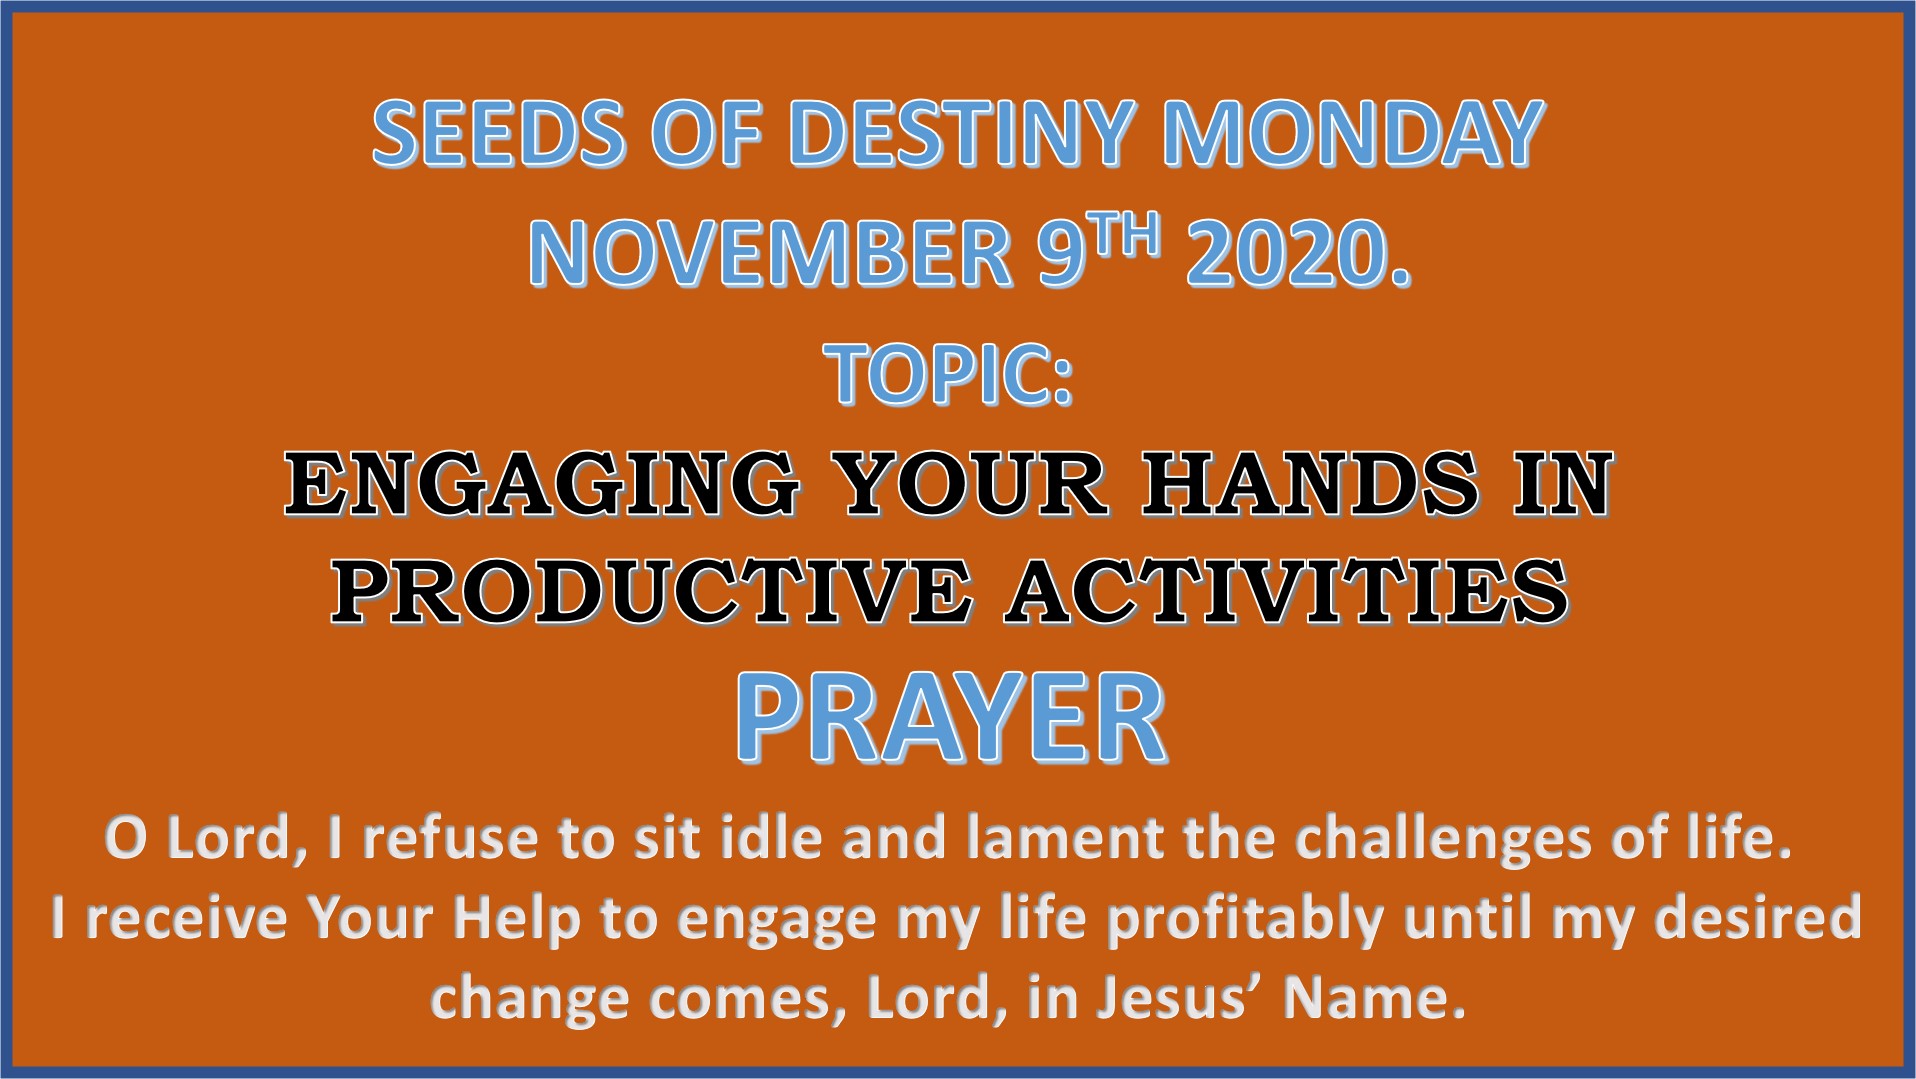 Seeds of Destiny Monday 9th November 2020 by Dr Paul Enenche